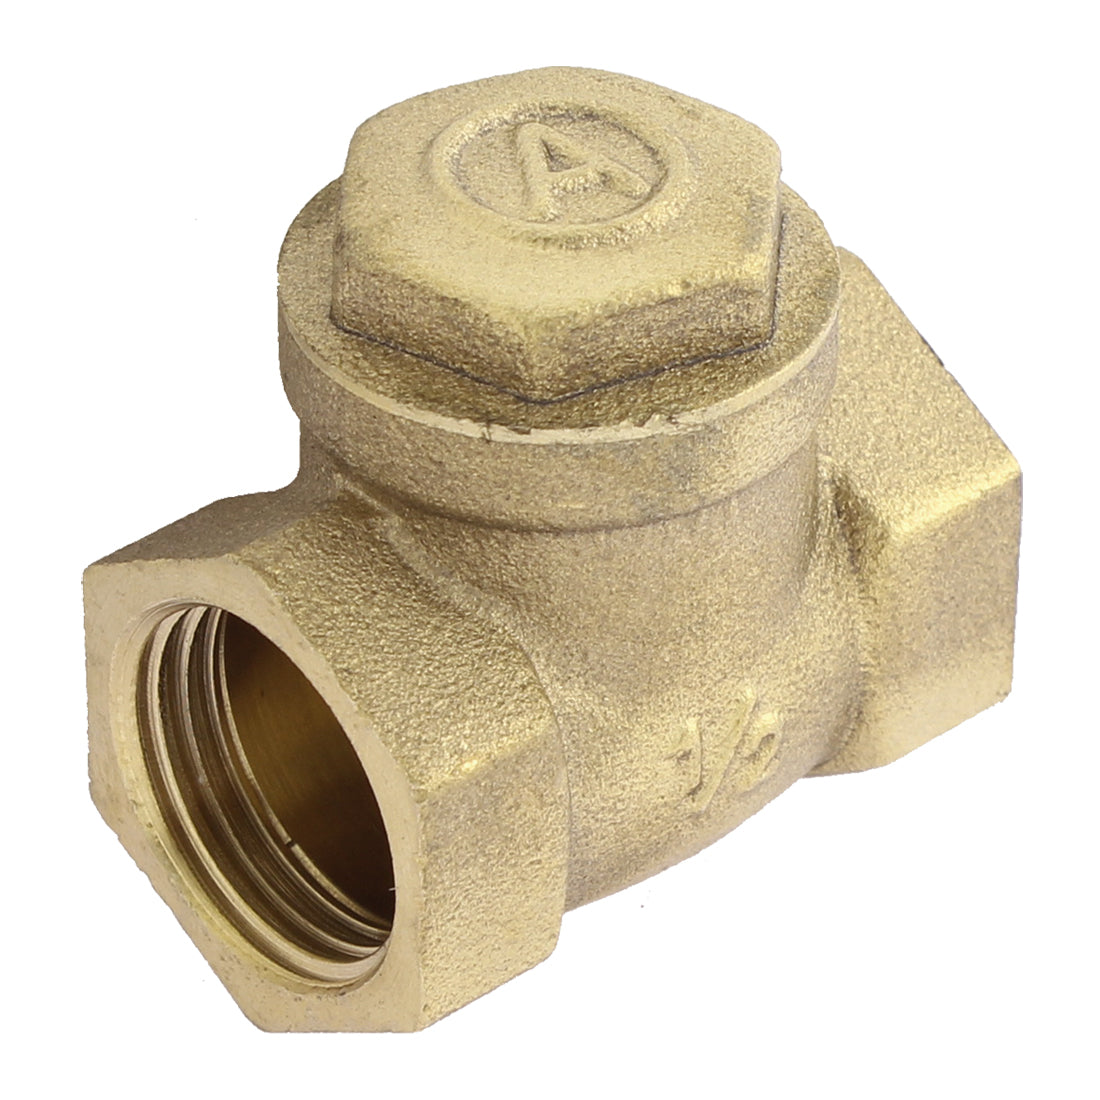 uxcell Uxcell Plumbing Water Heater Check Valve 1/2BSP Female Thread